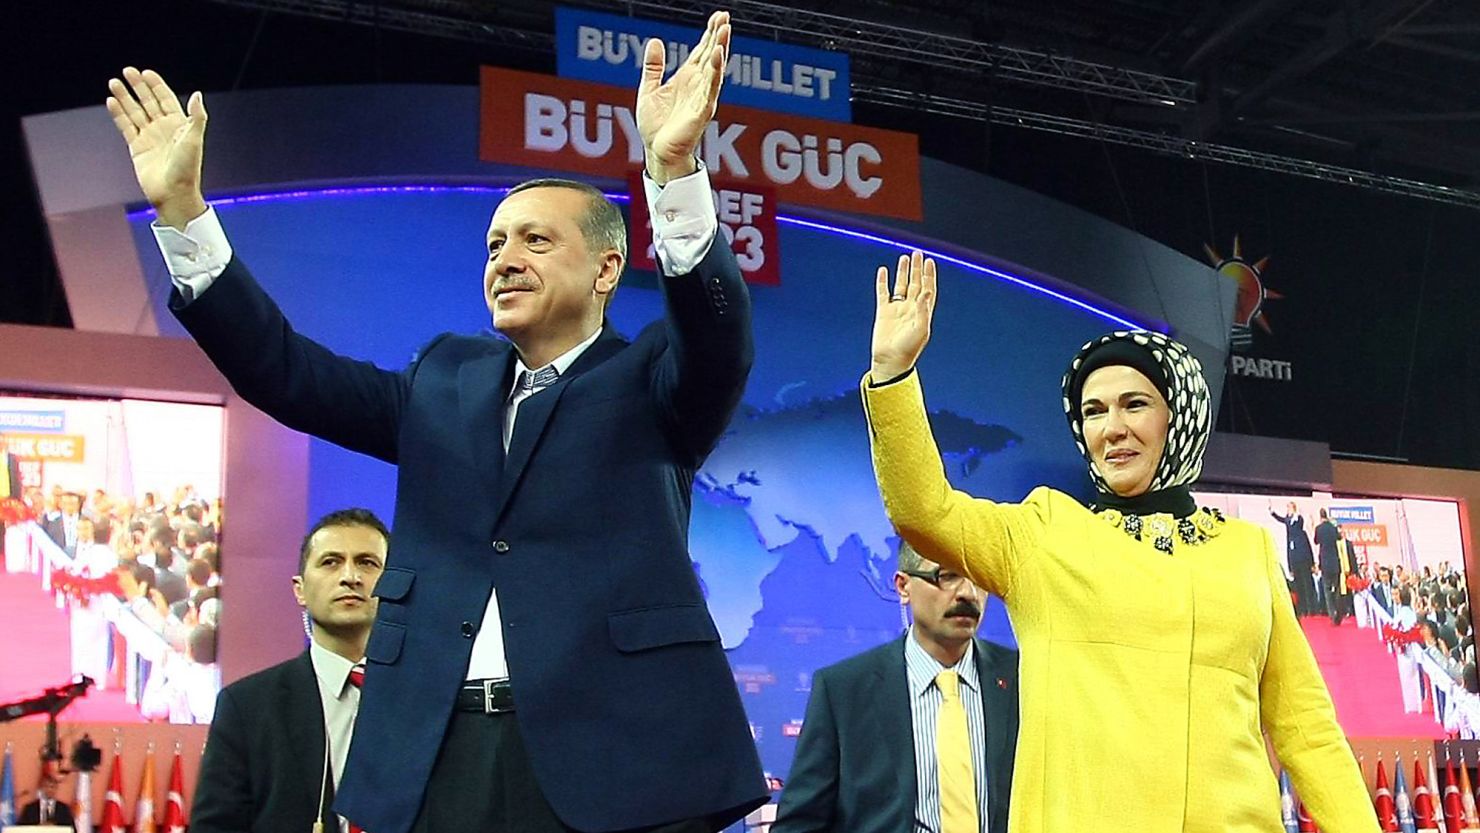  Turkish Prime Minister Recep Tayyip Erdogan and his wife Emine salute the audience during a congress of his party on Sunday.